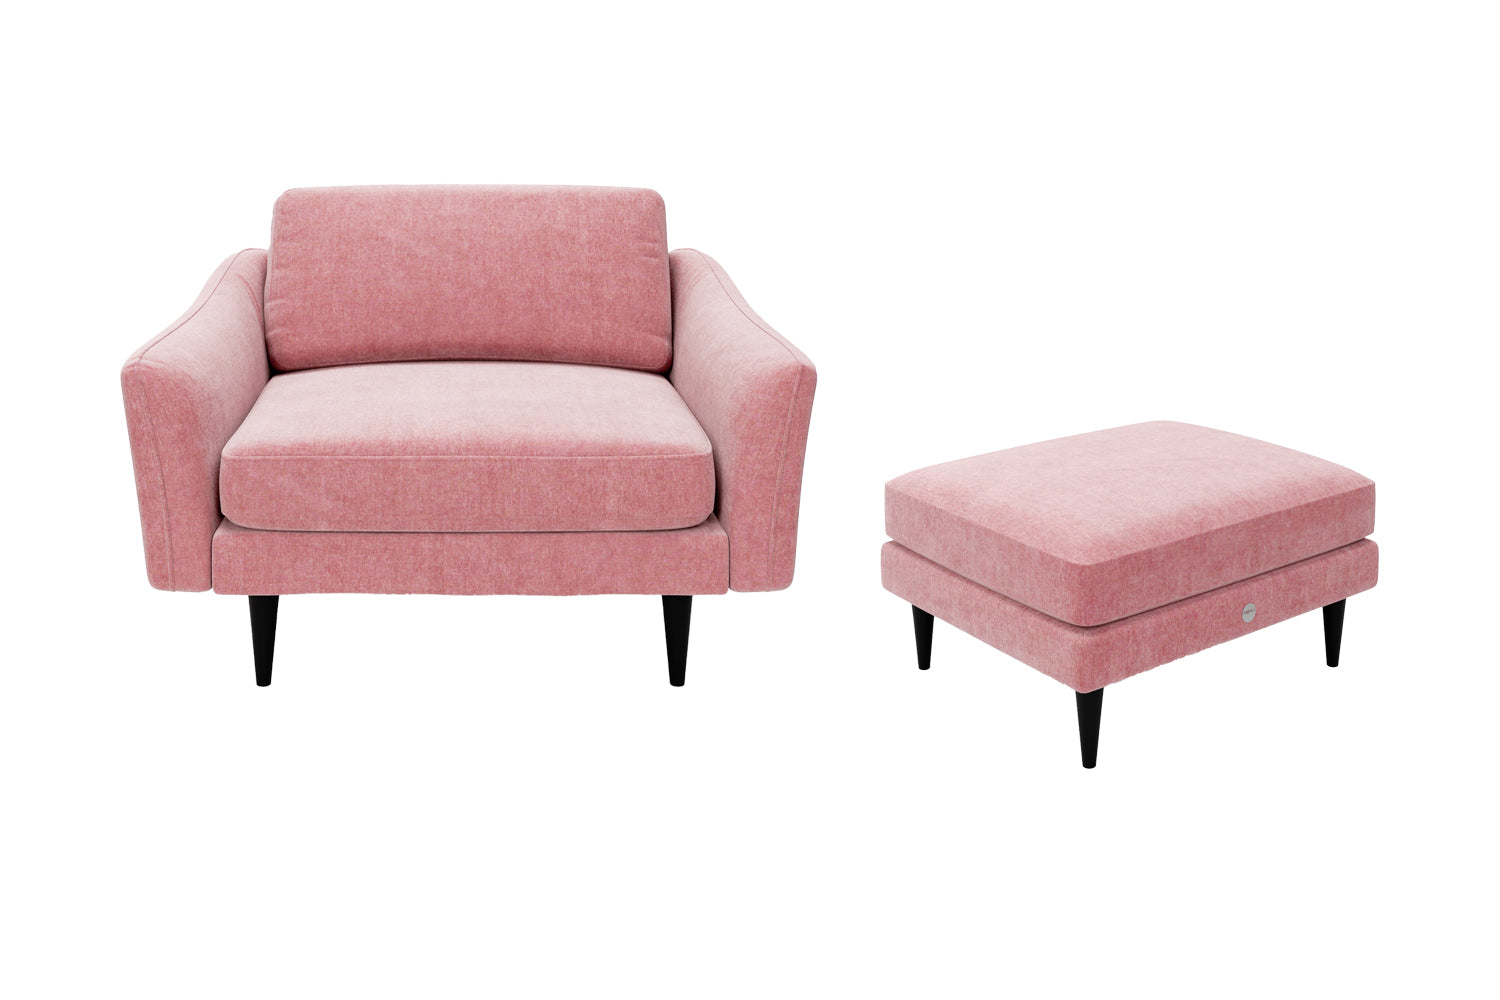 The Rebel - 1.5 Seater Snuggler and Footstool Set - Blush Coral